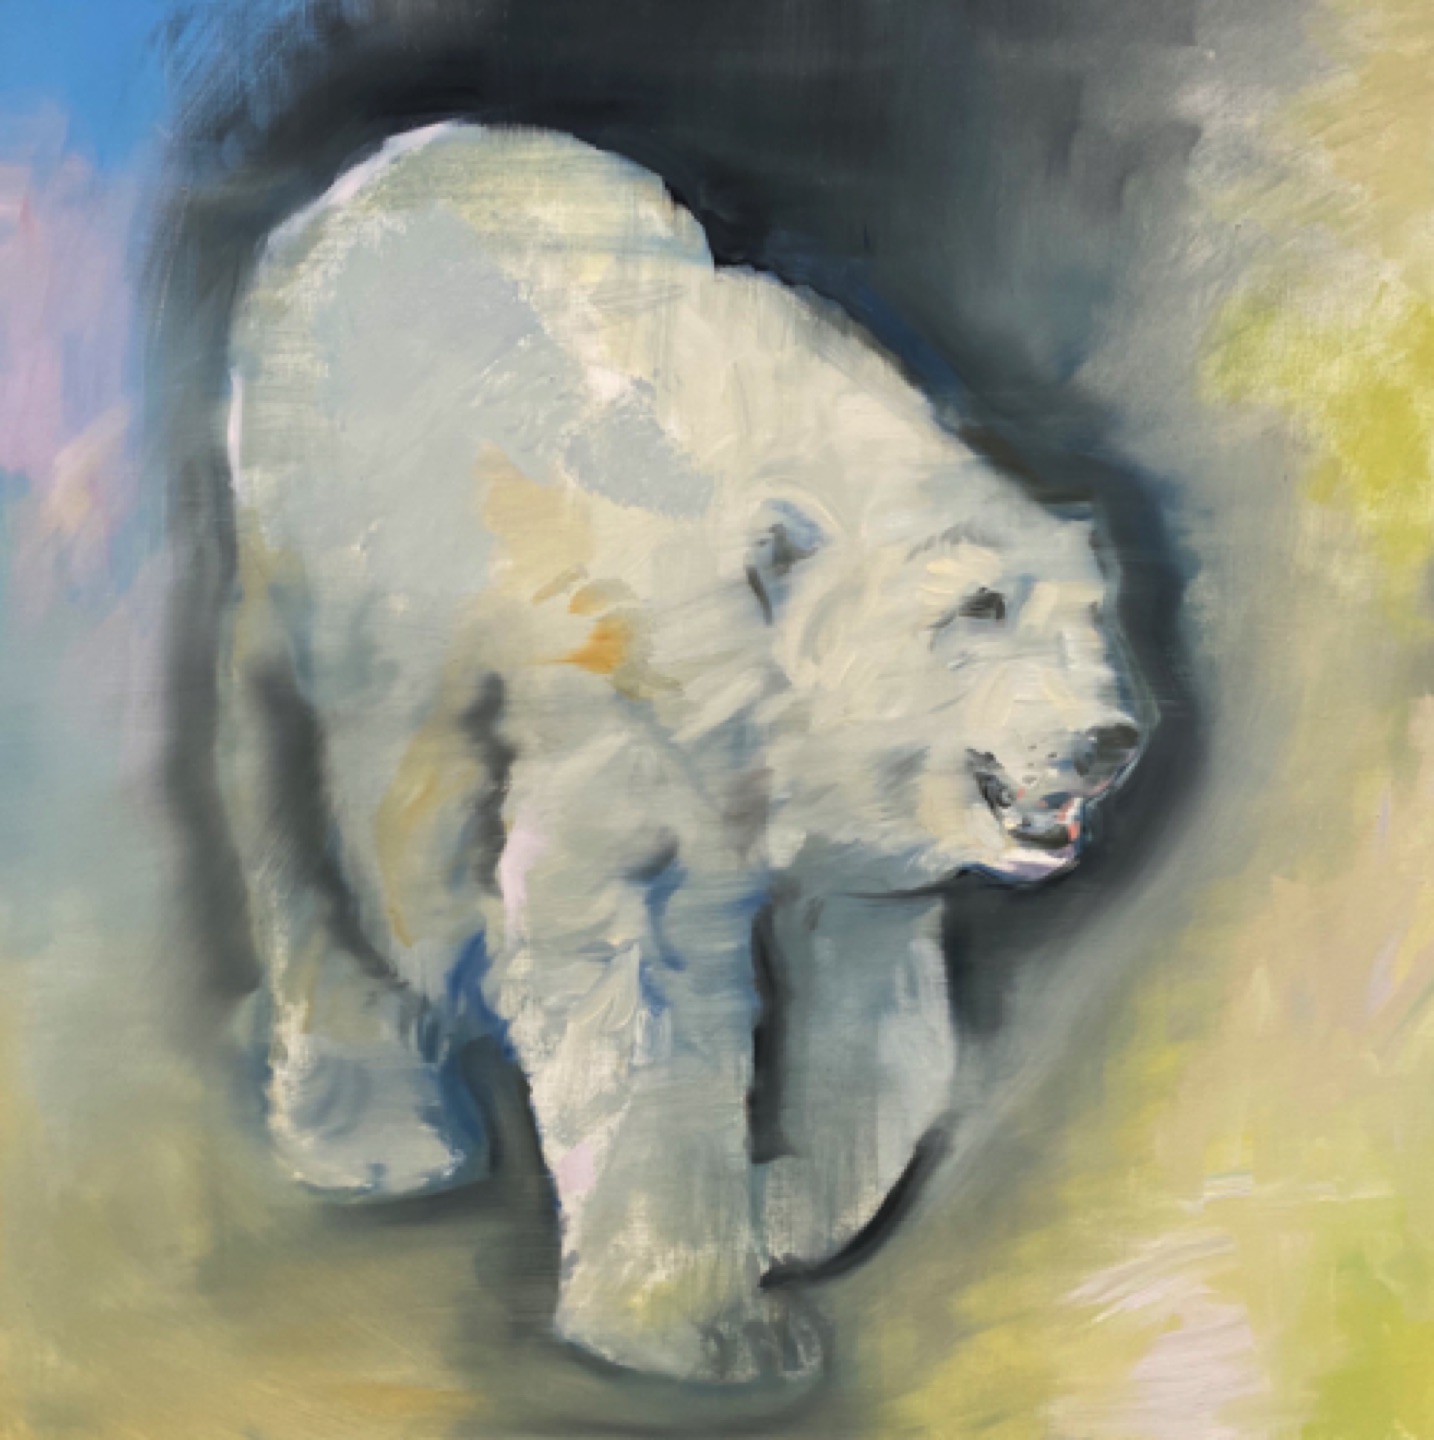 Gregg Chadwick
Sea Bear
36"x36"oil on linen 
Private Collection, Linz, Austria
Sold by Singulart - August 2020